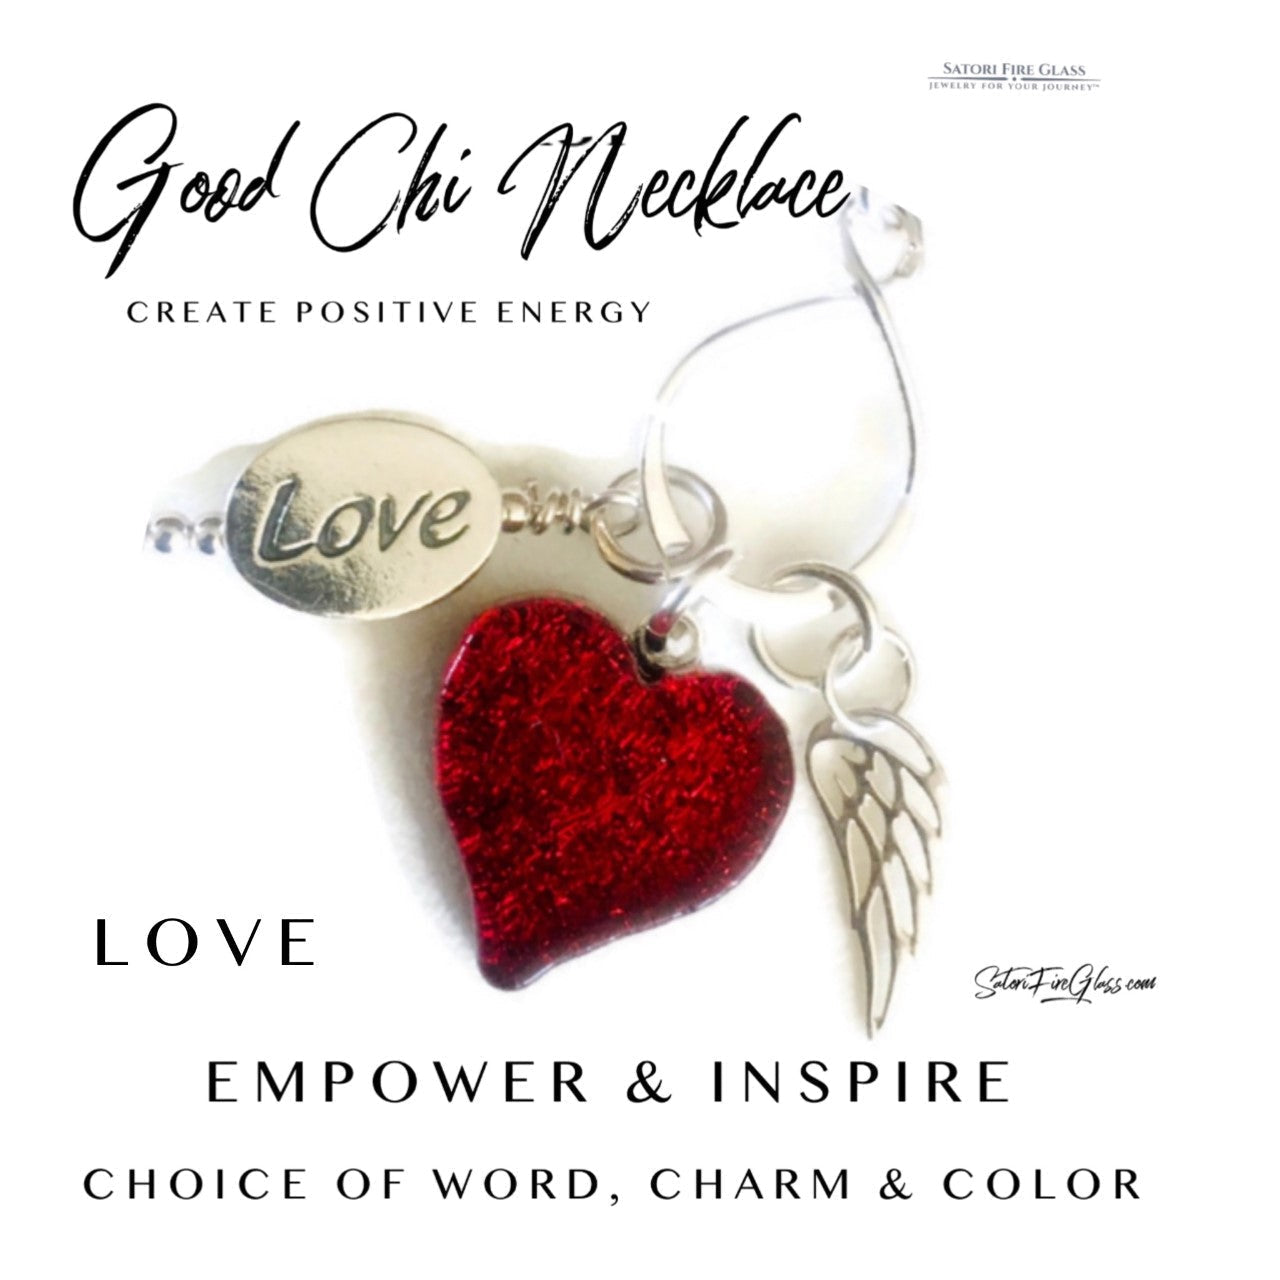 Good Chi™ Charm Necklace  Create Positive Energy